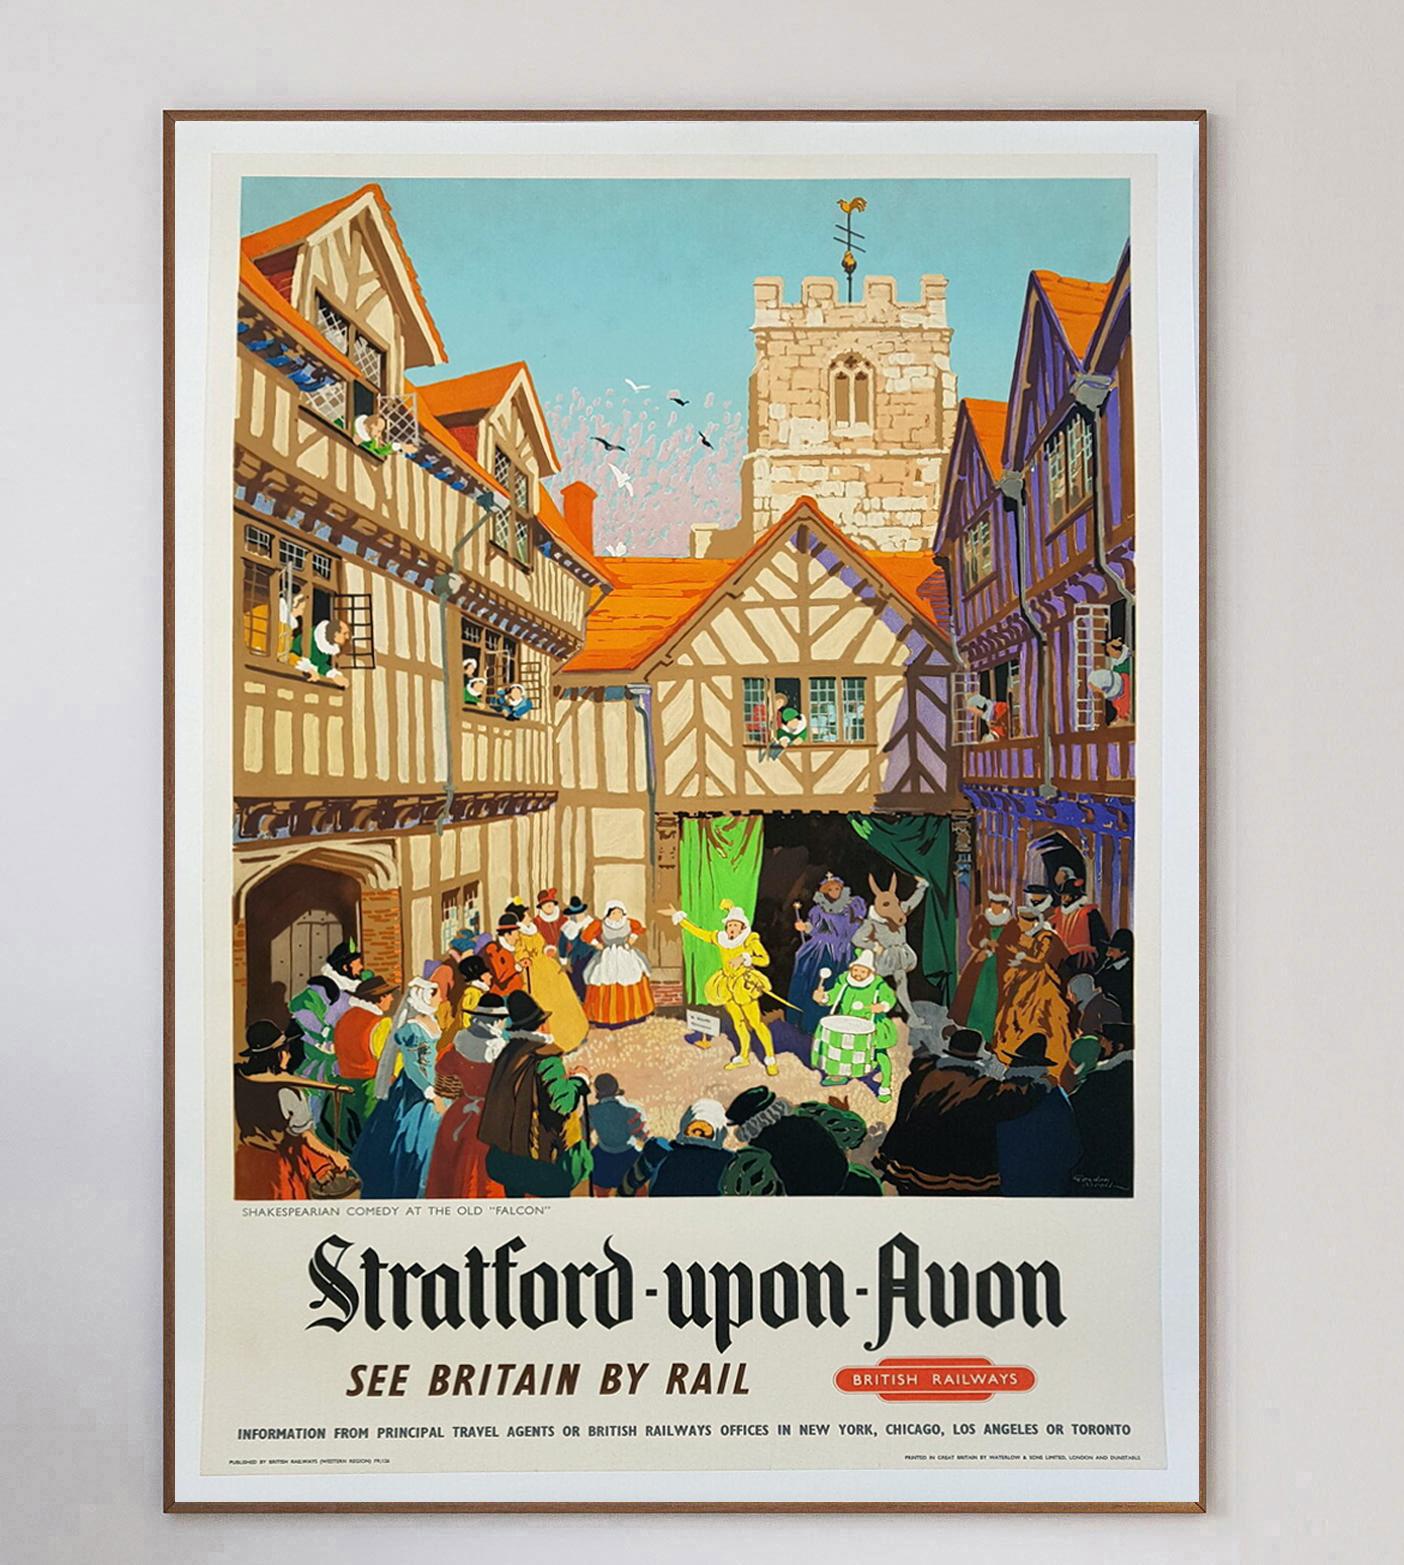 This beautiful & rare poster was created in 1952, advertising British Railways routes to Stratford-upon-Avon in Warwickshire, England. With vibrant artwork by Gordon William Nicoll (1888-1959) depicting a scene of people enjoying the Shakespeare